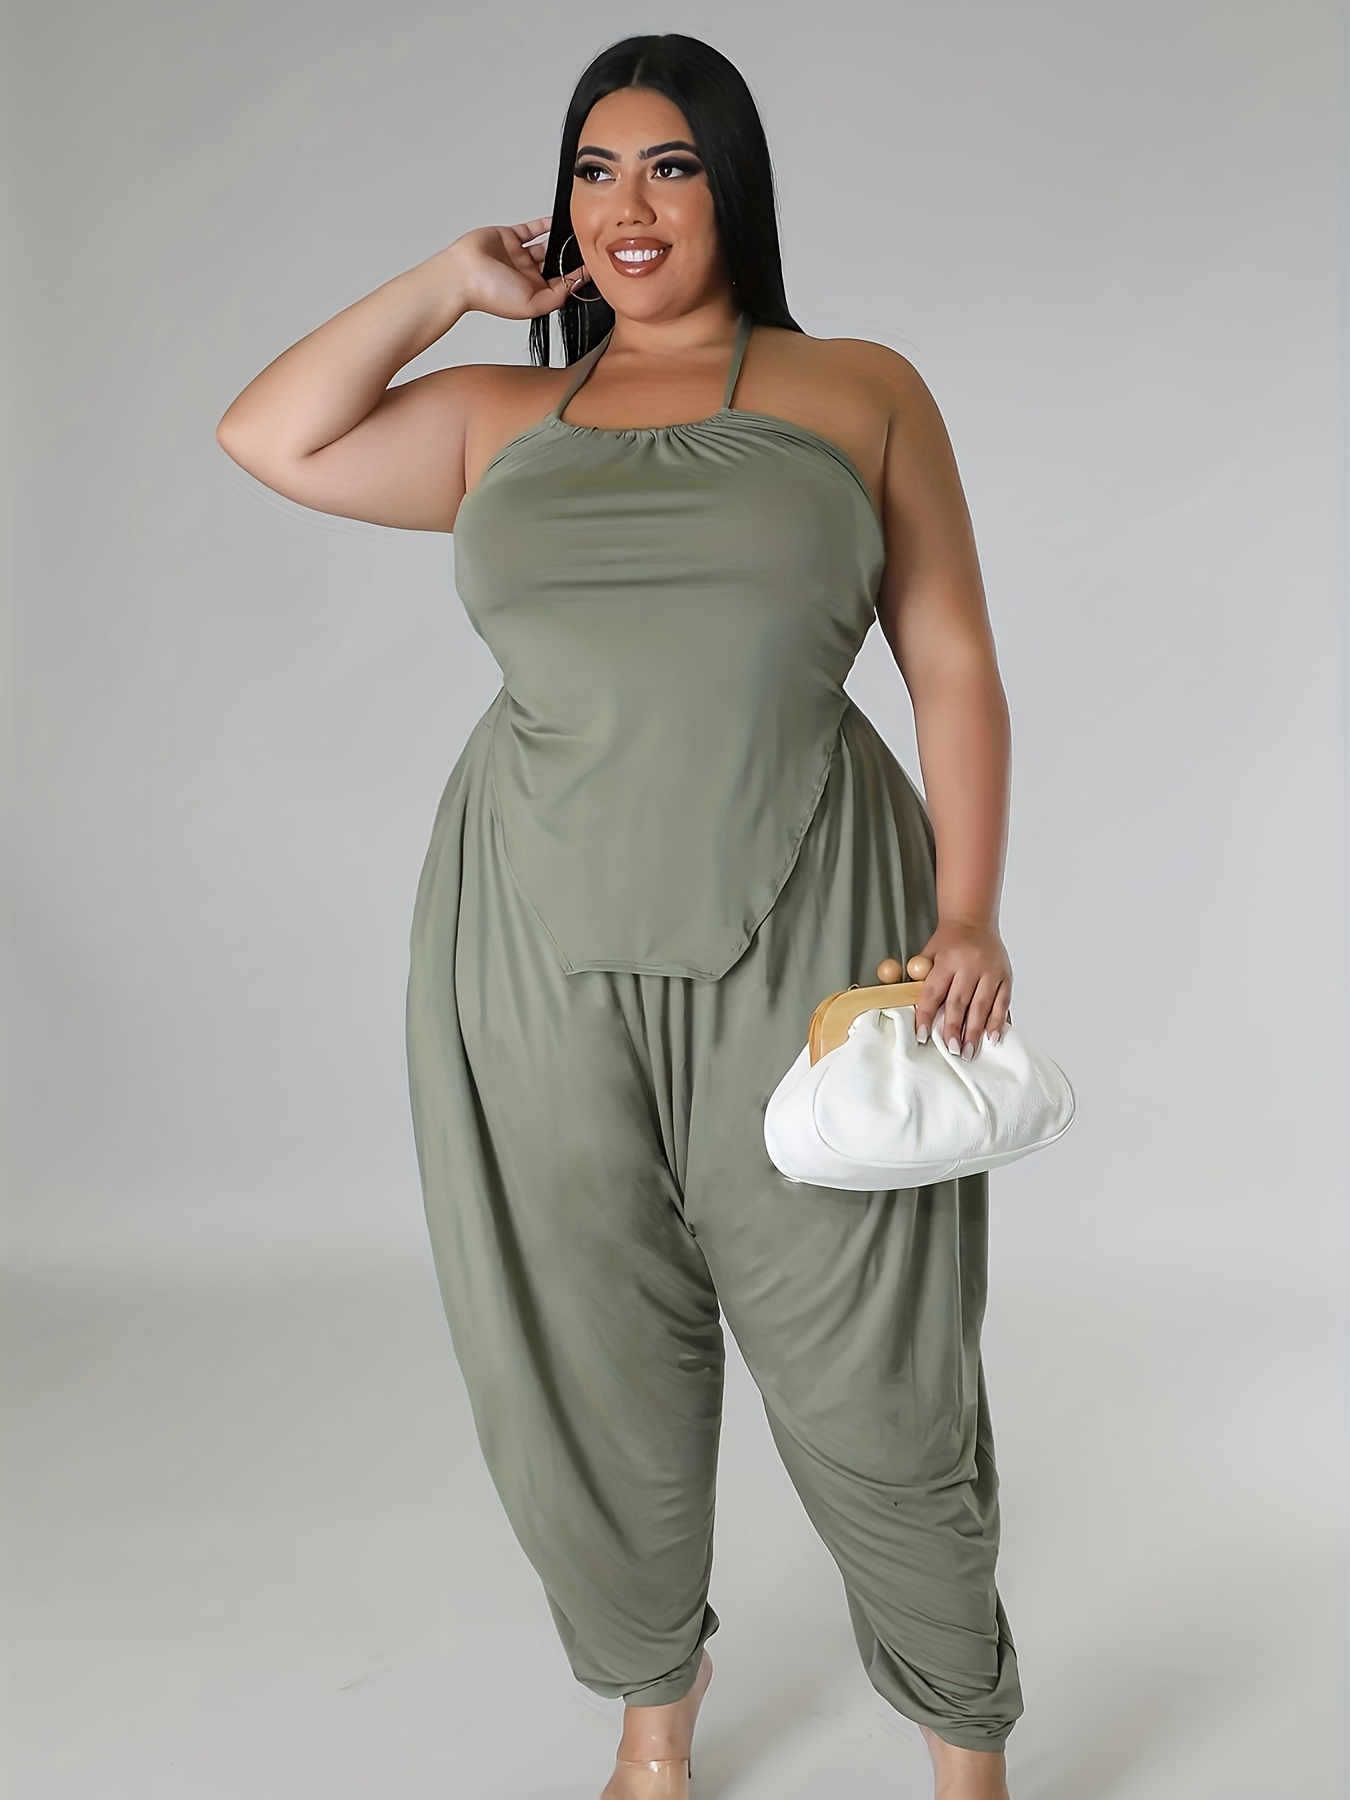 Plus Size Casual Outfits Two Piece Set, Women's Plus Solid Halter Neck Tie  Back Backless Cami Top & Harem Pants Outfits 2 Piece Set